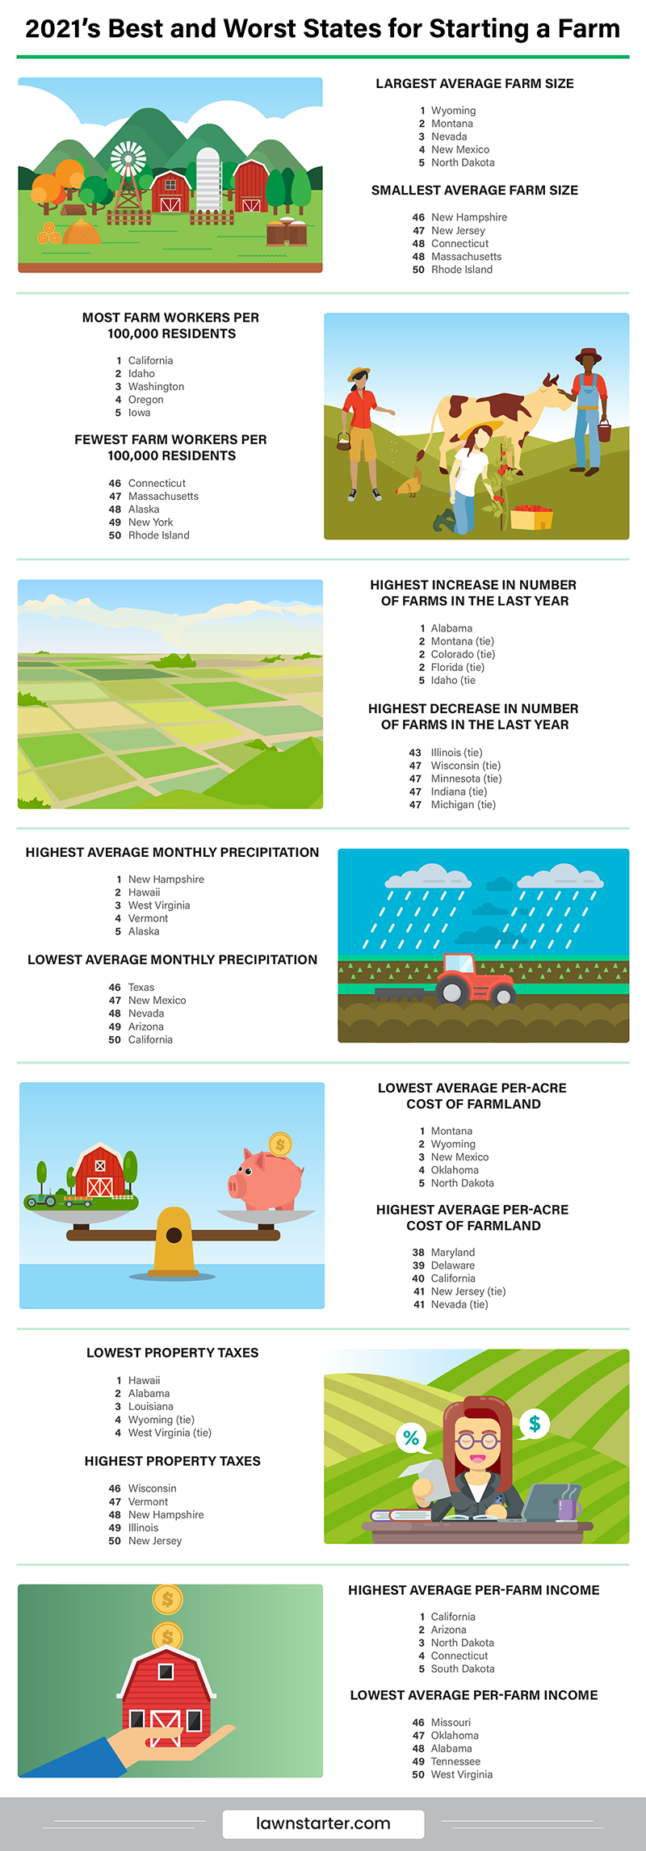 Best-and-Worst-States-for-Starting-a-Farm-update-1-646x1851.png